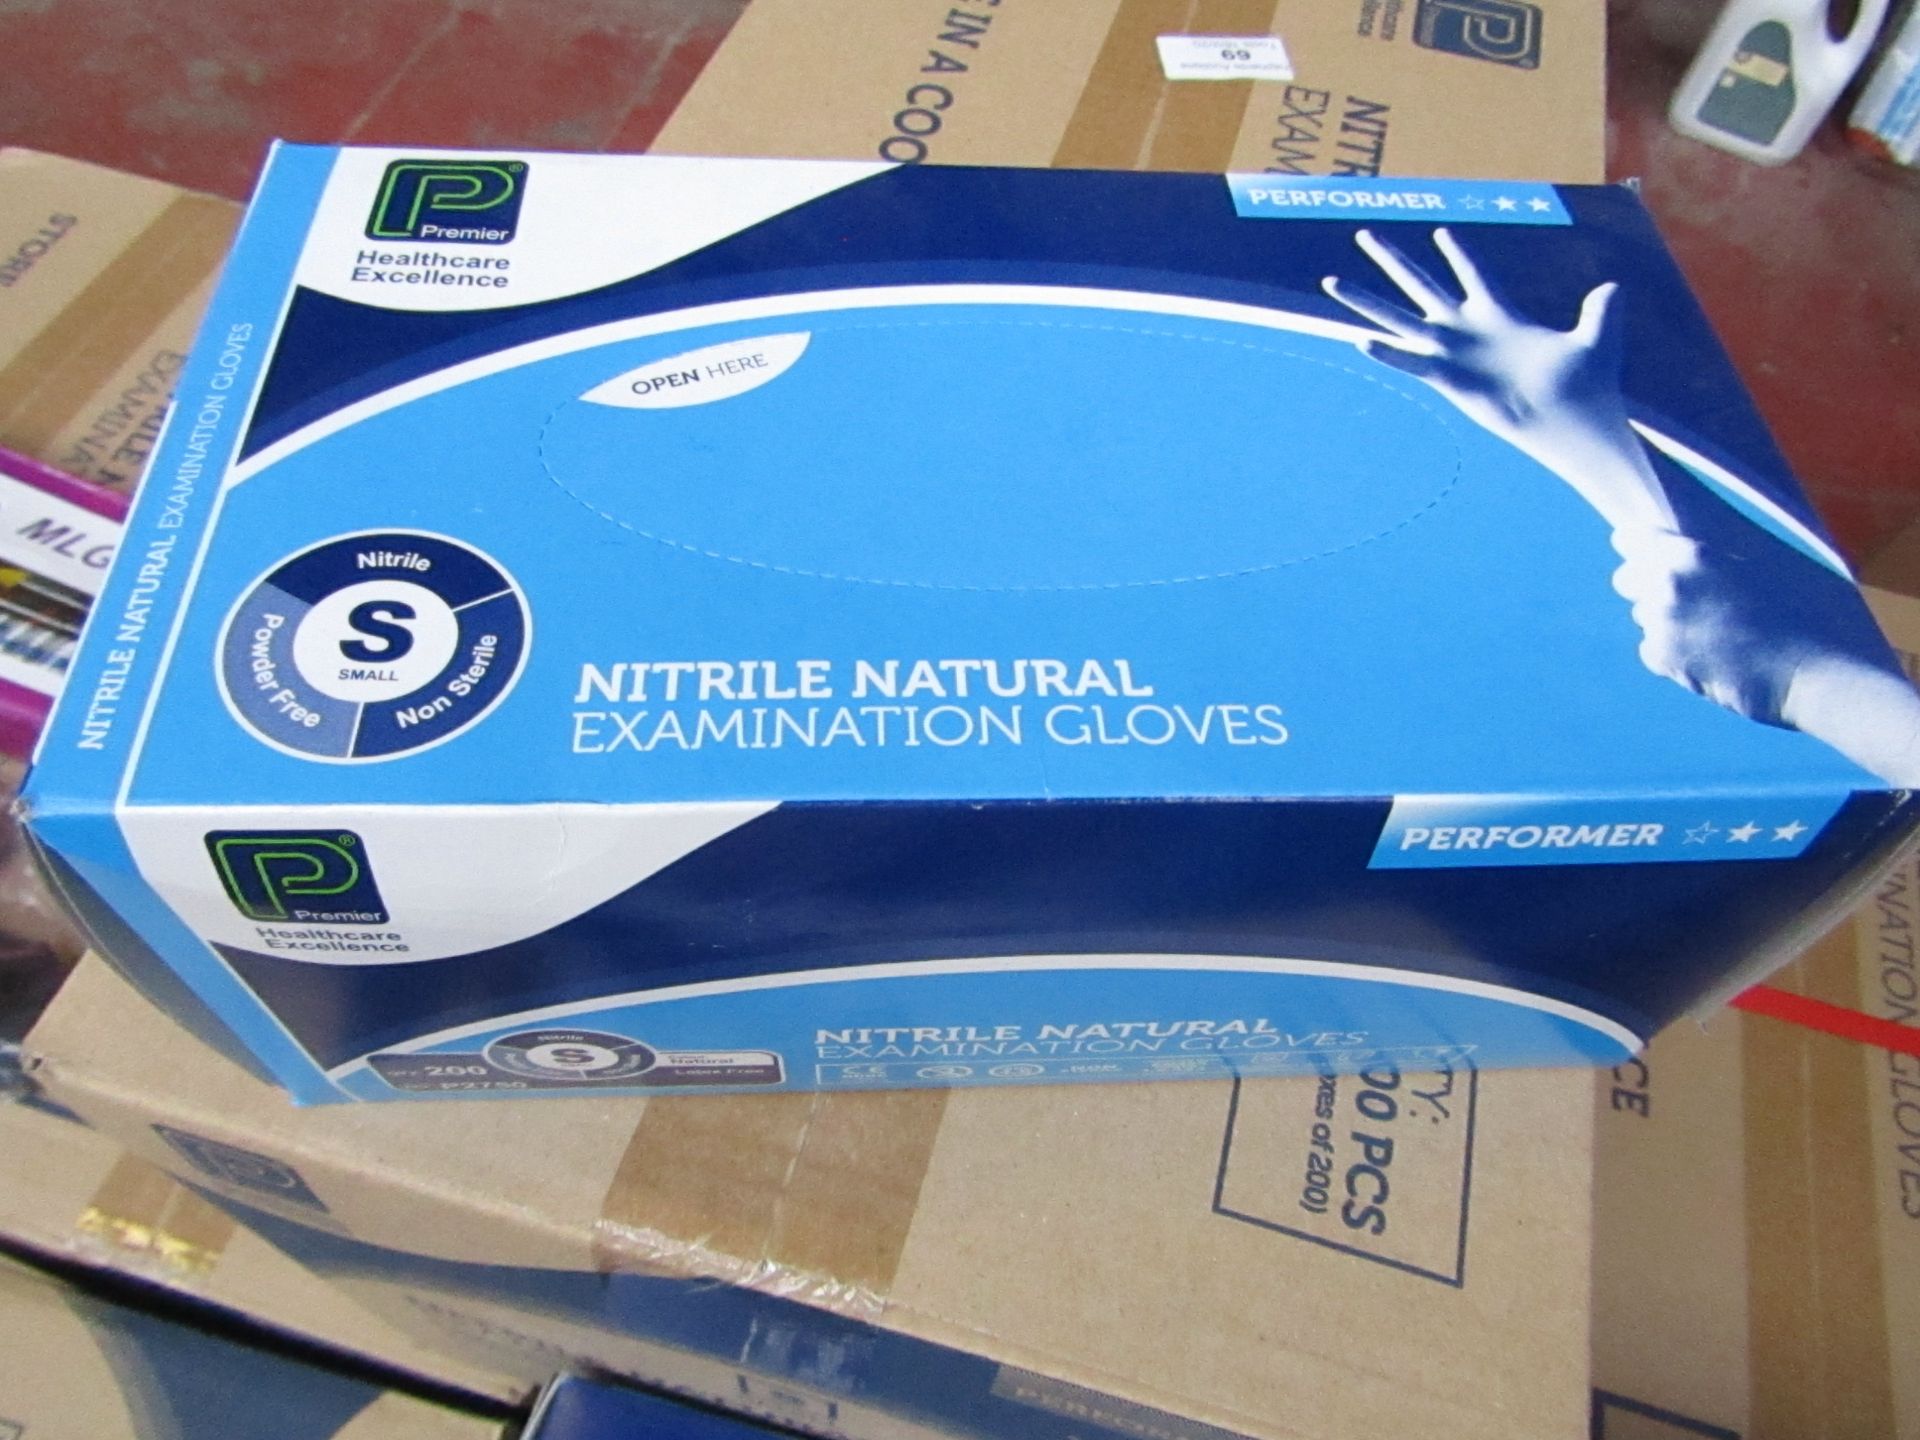 10x Boxes of 200 Nitrile Examination Gloves (2000 gloves in total), new size small